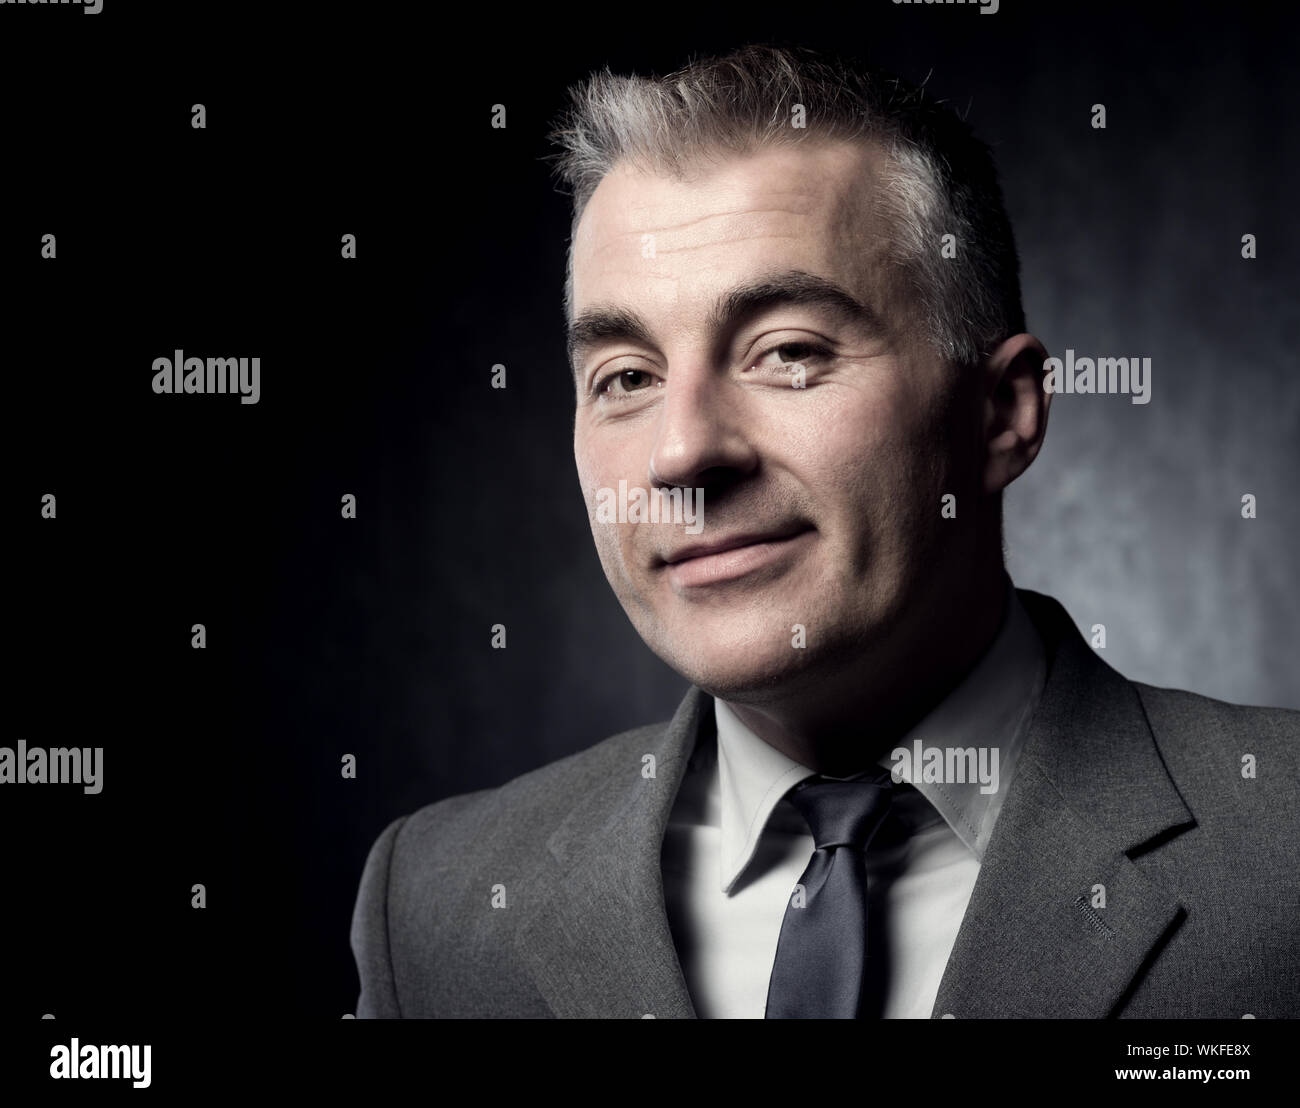 Handsome businessman smiling confidently at camera on dark background Stock Photo